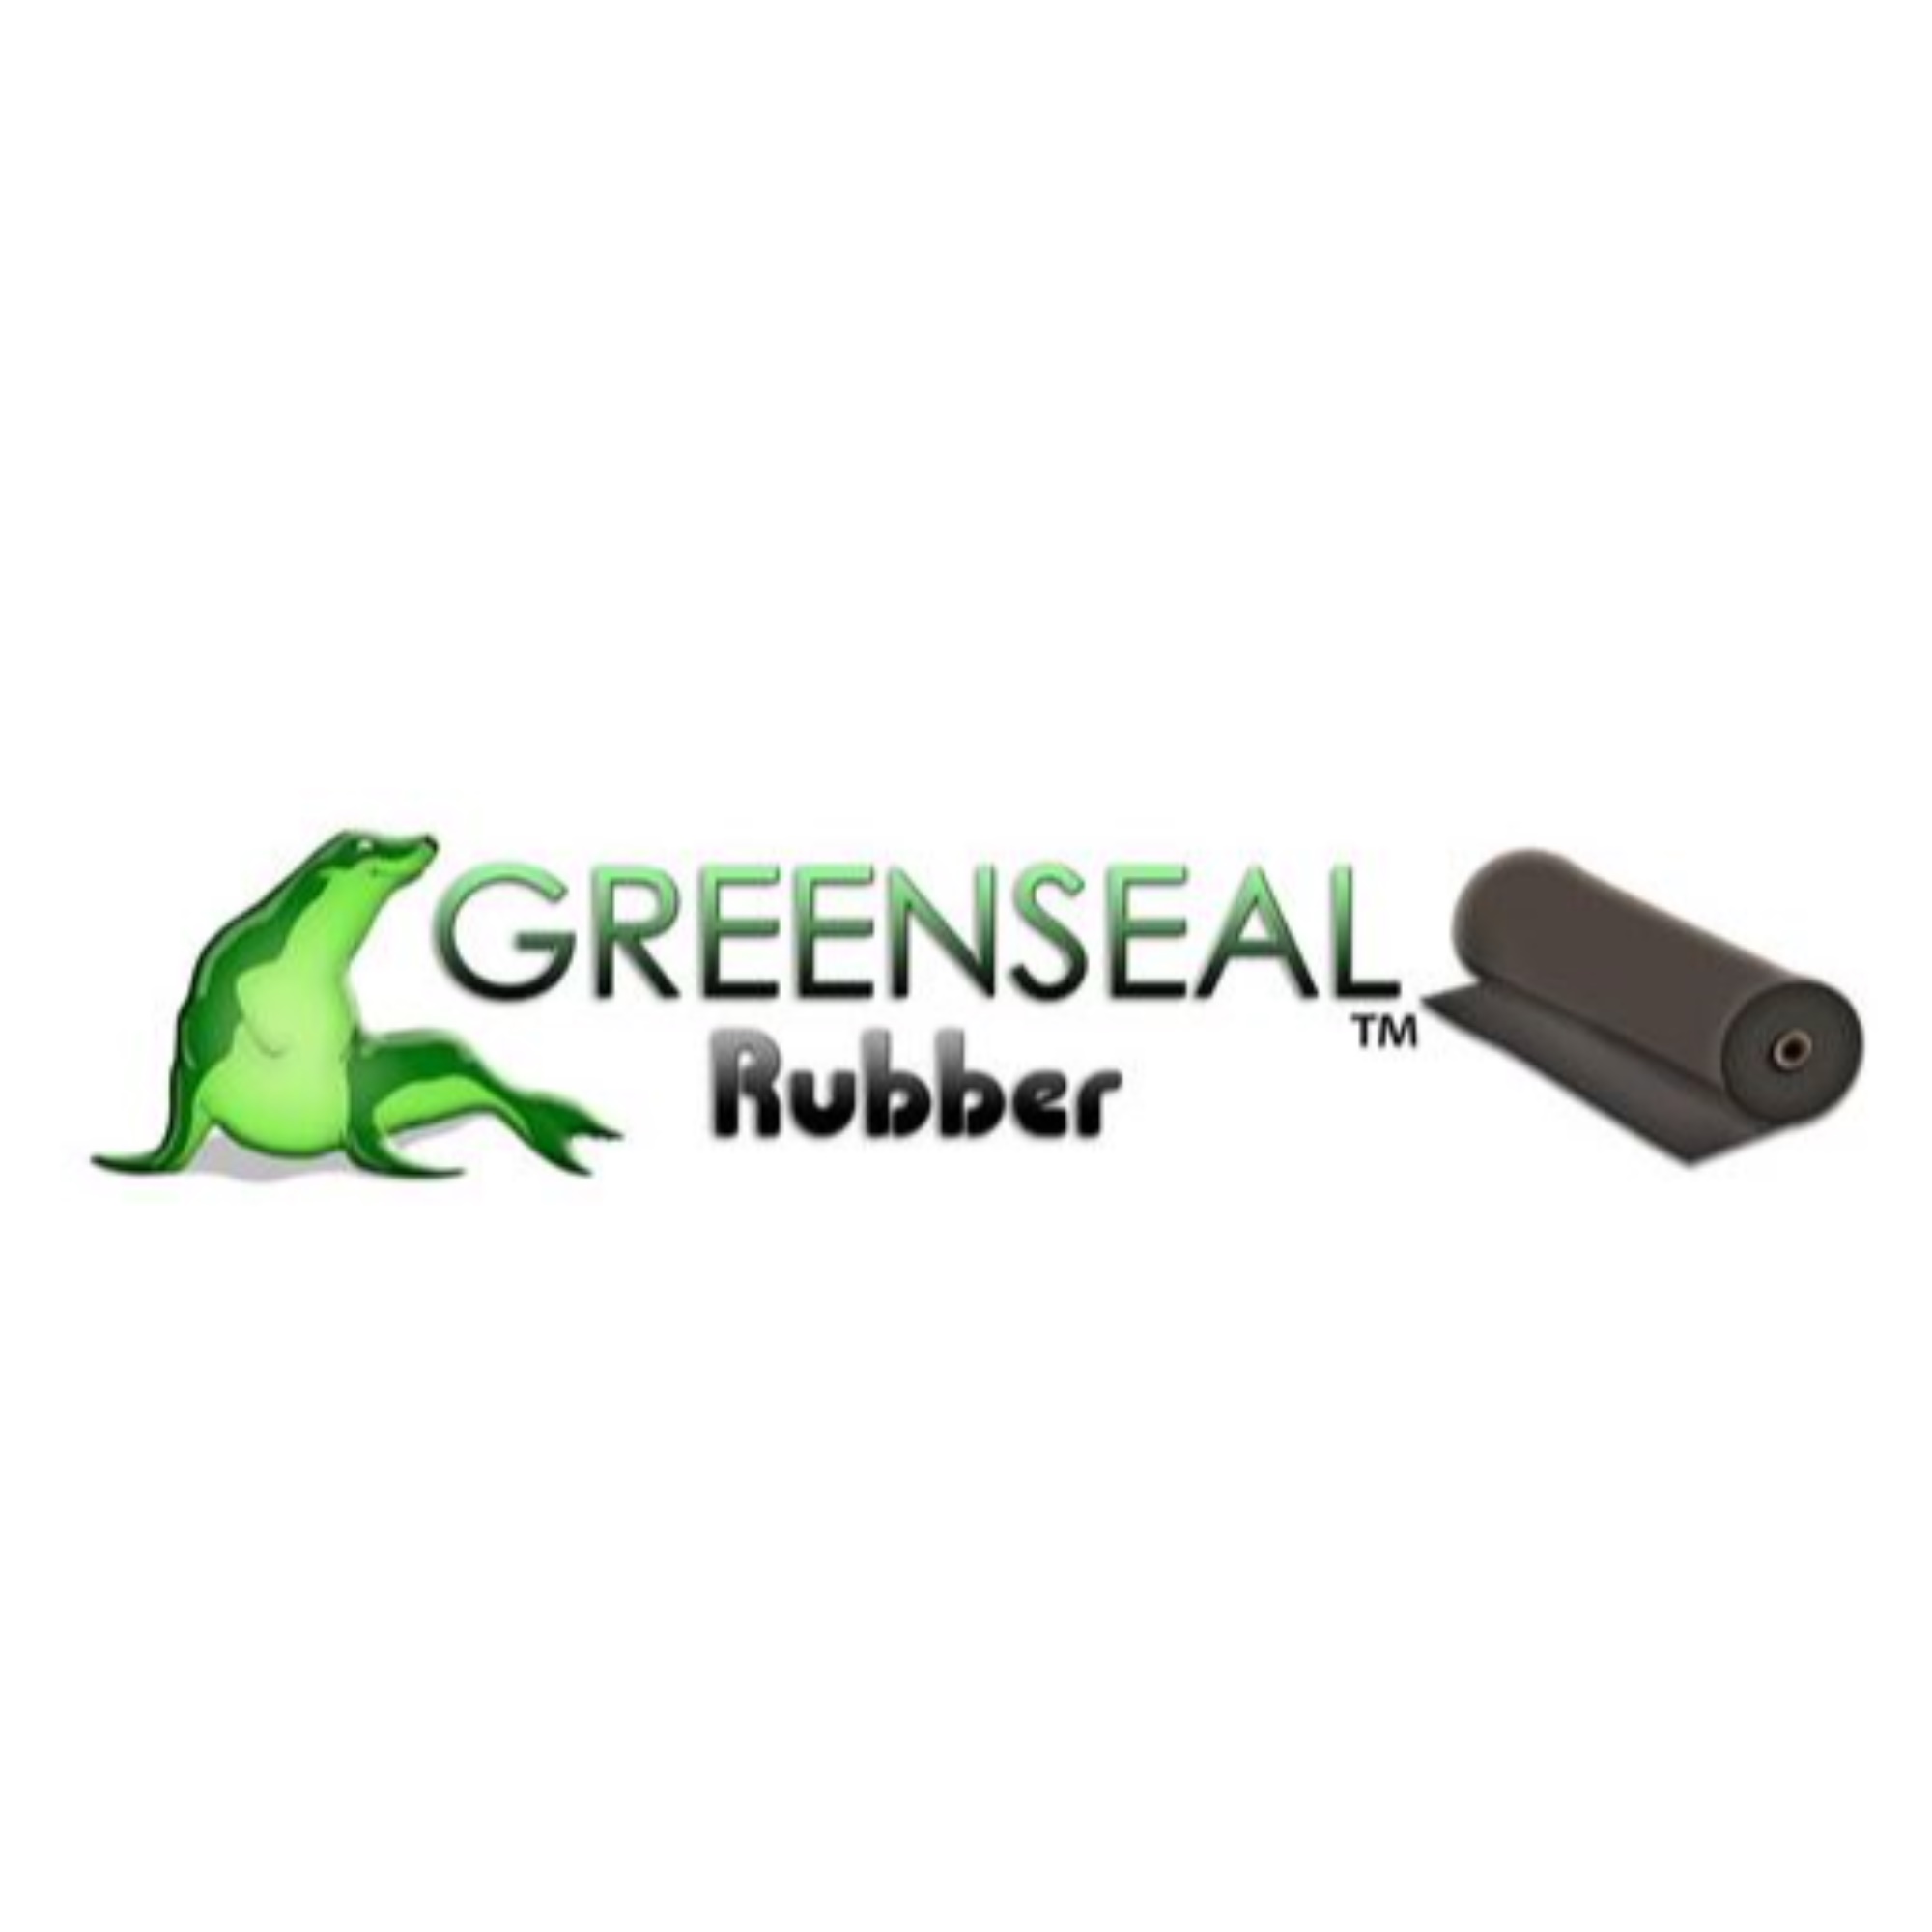 Greenseal Rubber Pond & Lake Liners